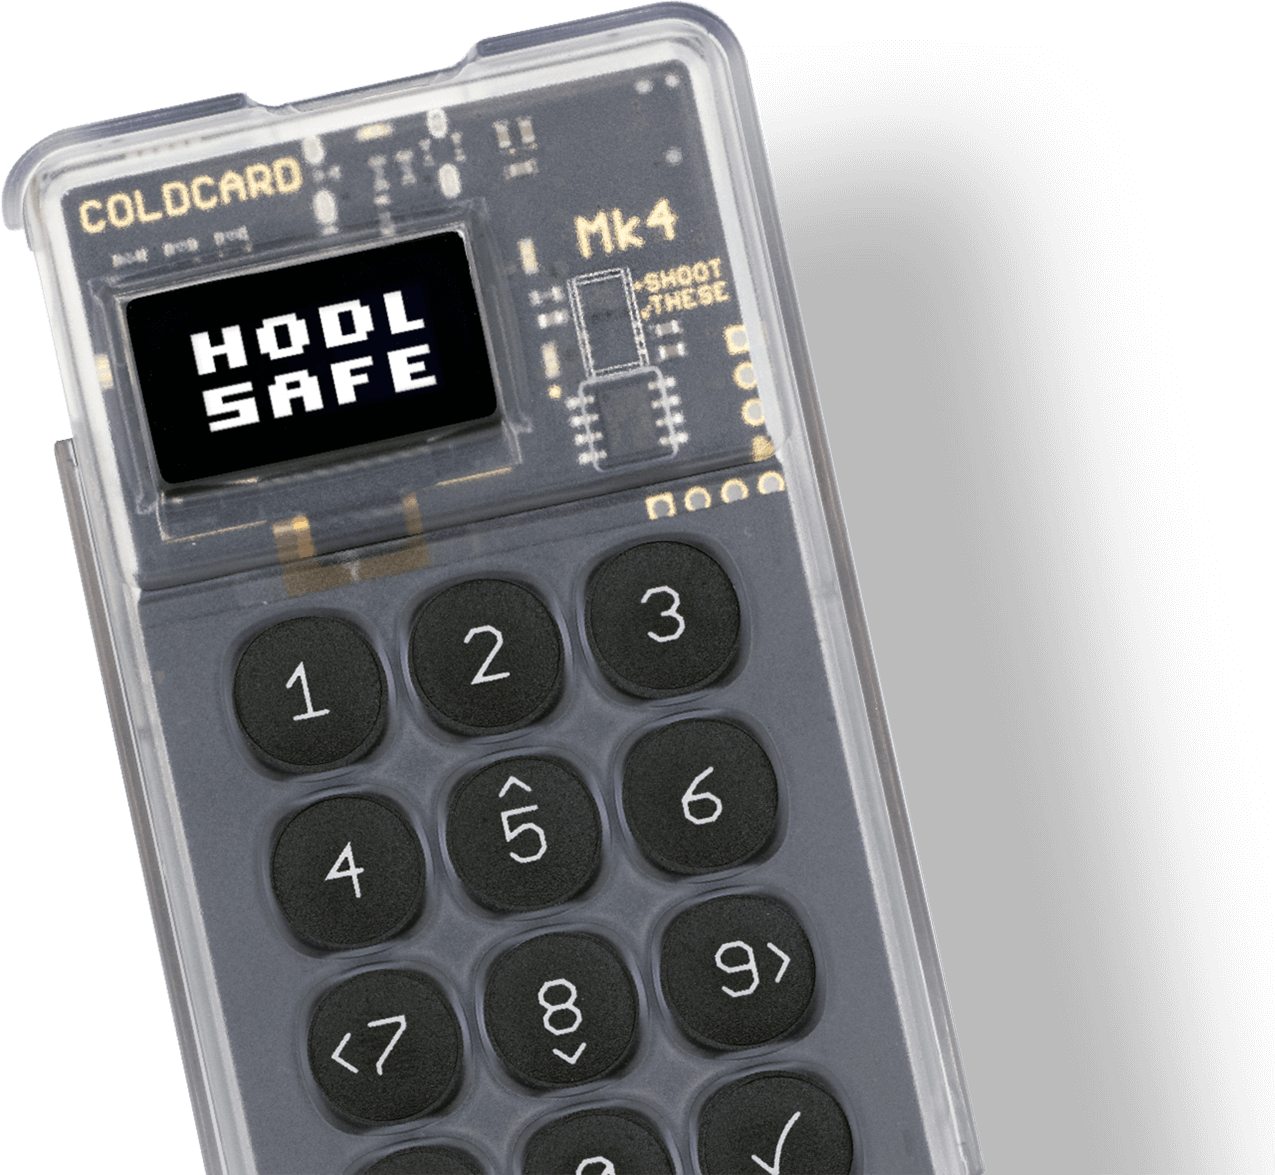 COLDCARD device